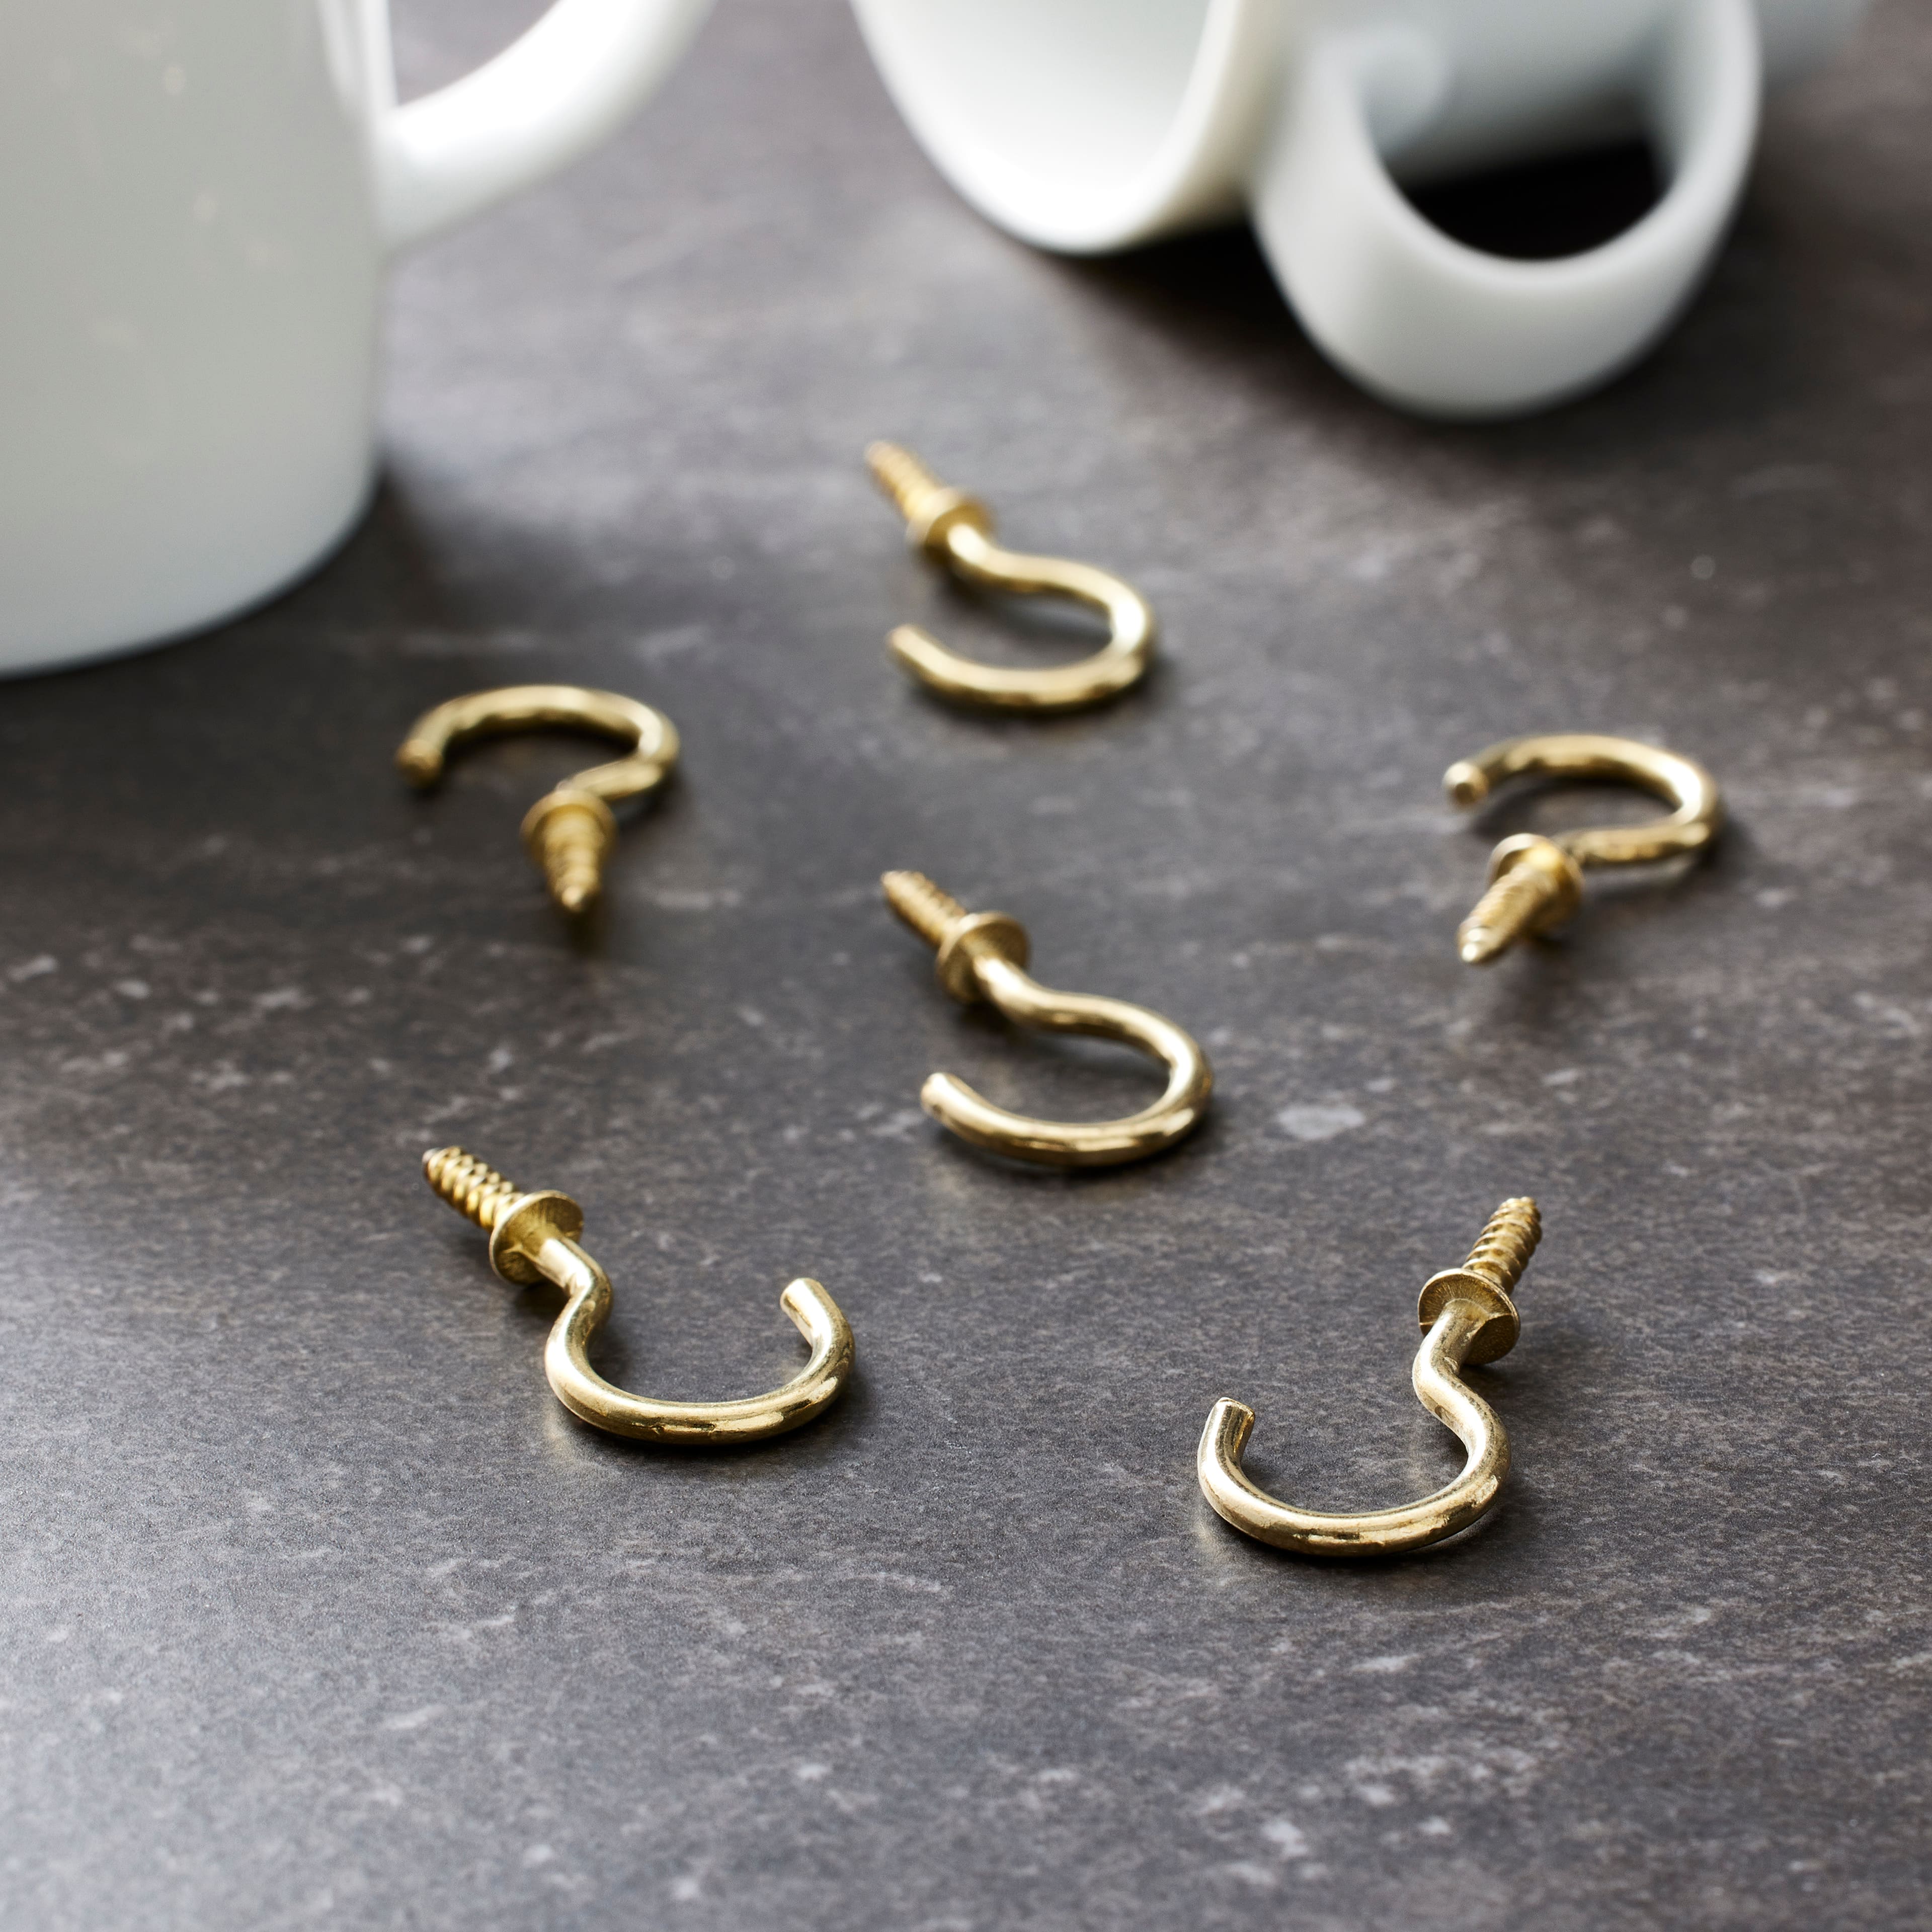 Cup Hooks Screw in 3/4 inch, Pack of 100 Mini Screw in Hooks for Hanging,  by Woodpeckers